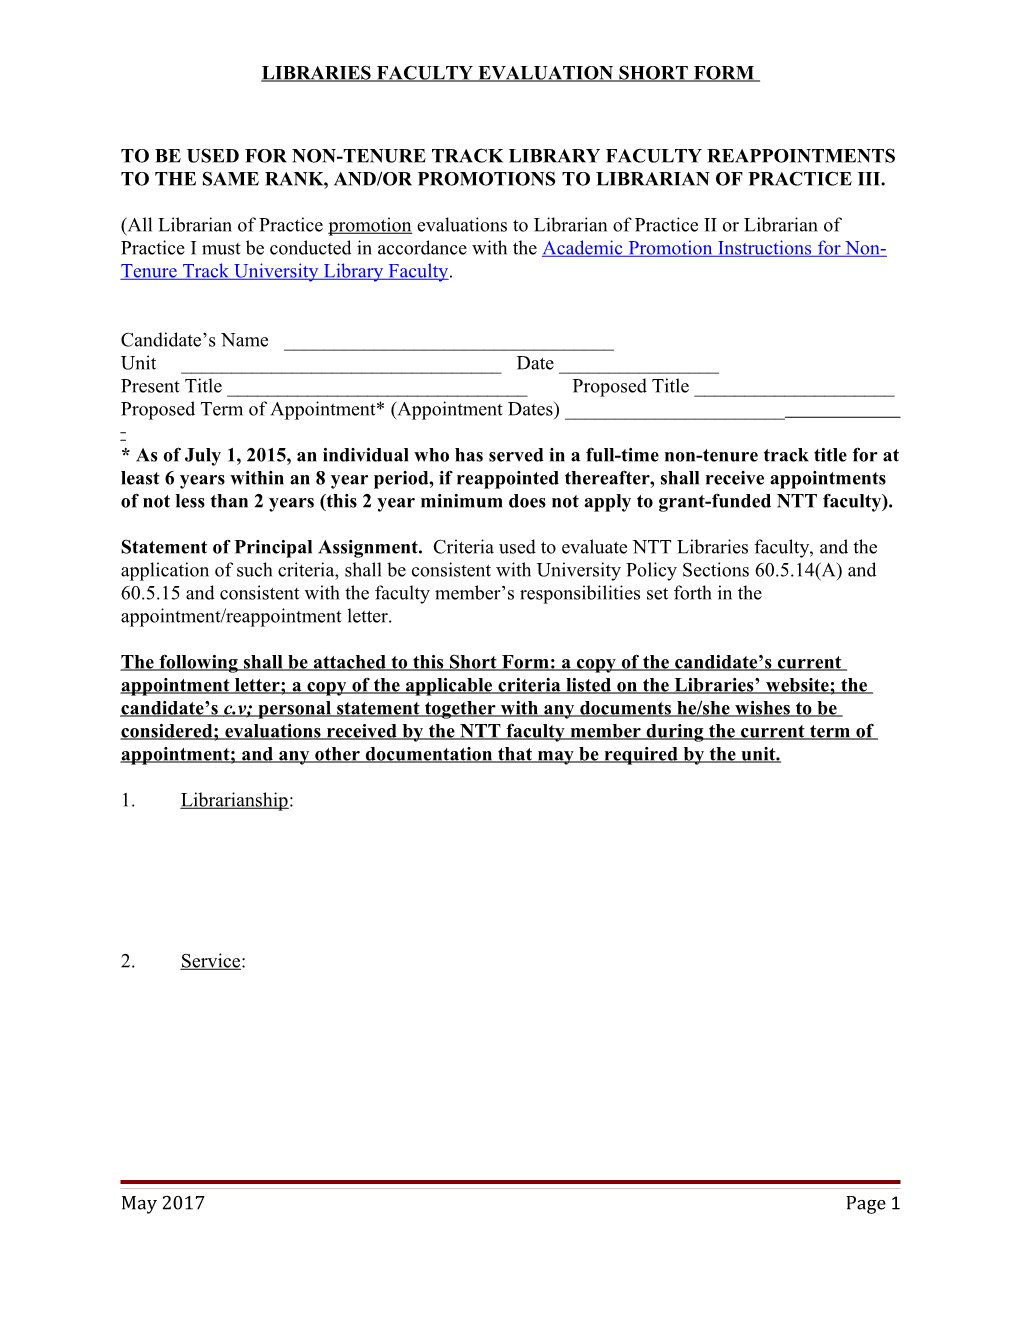 Libraries Faculty Evaluation Short Form